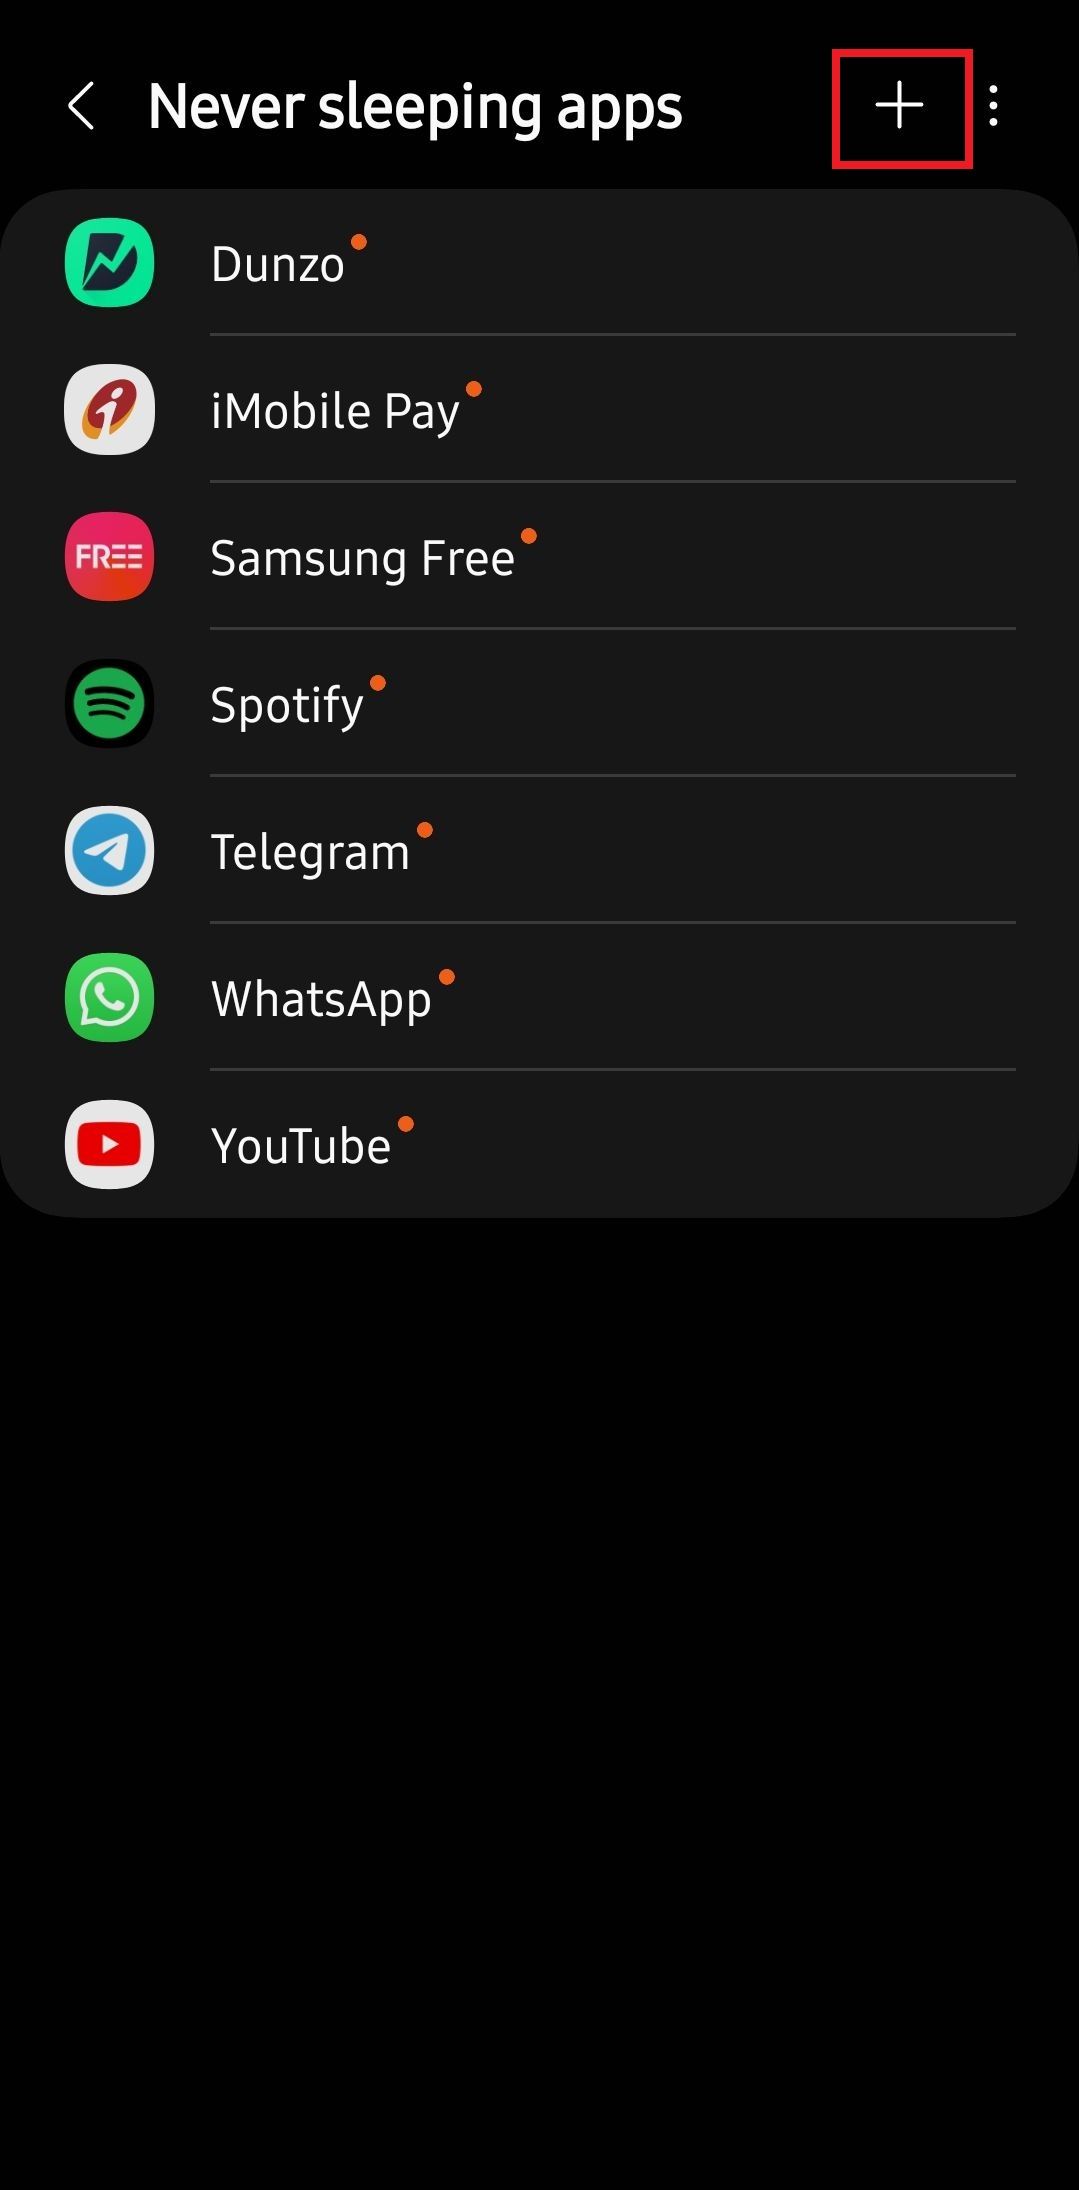 Screenshot showing the plus icon under Never sleeping apps